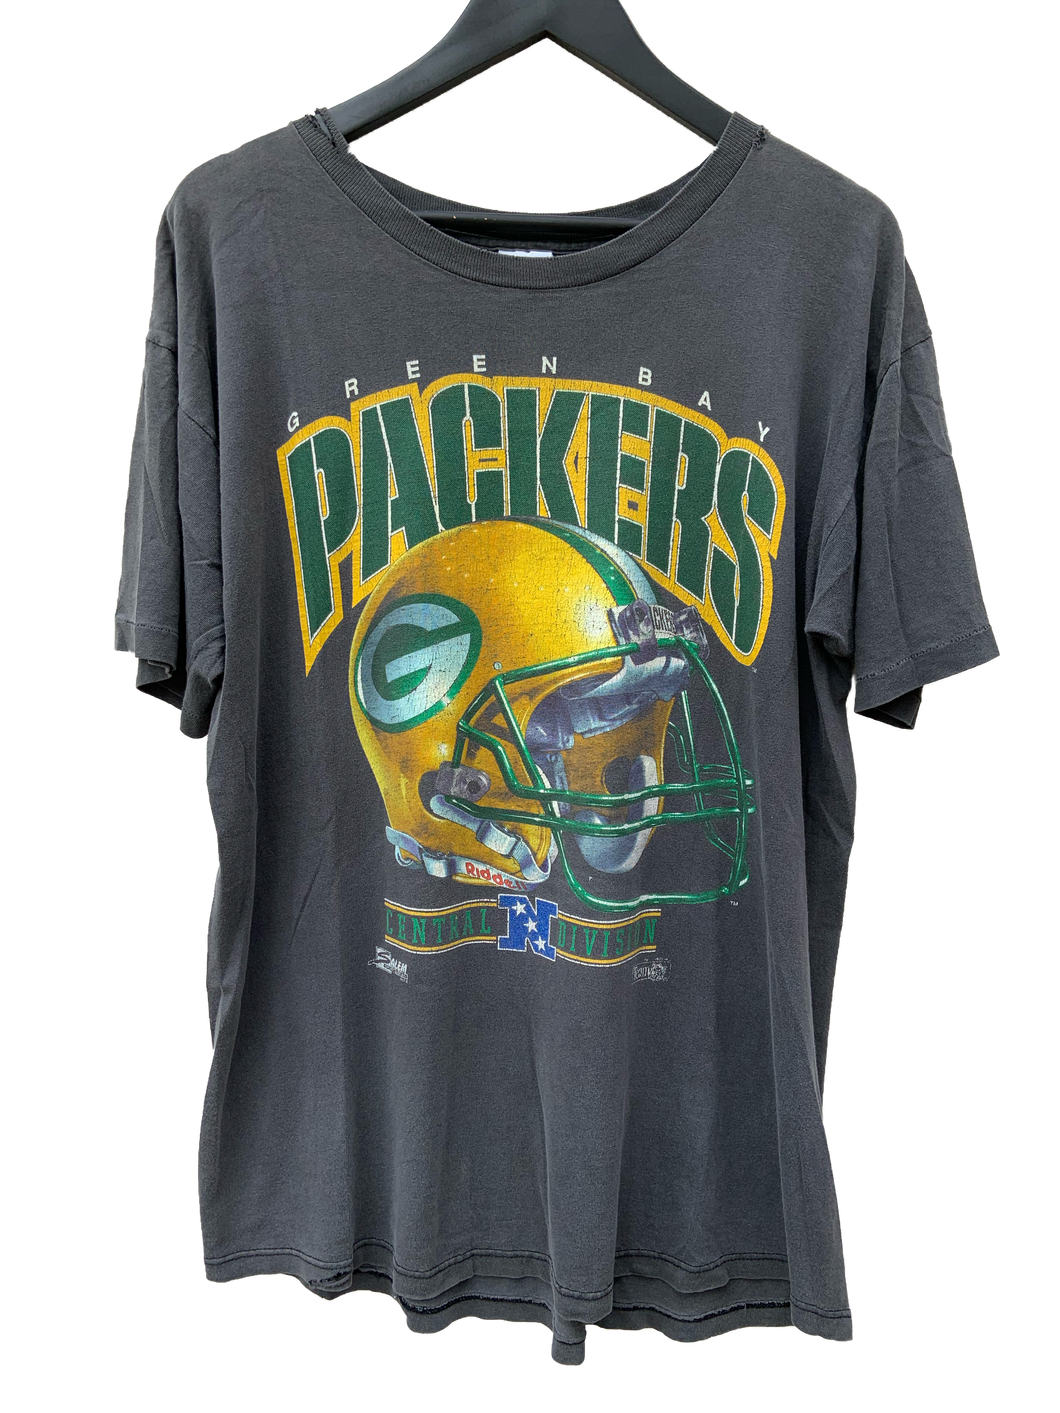 1993 GREEN BAY PACKERS ‘SS’ TEE - XL